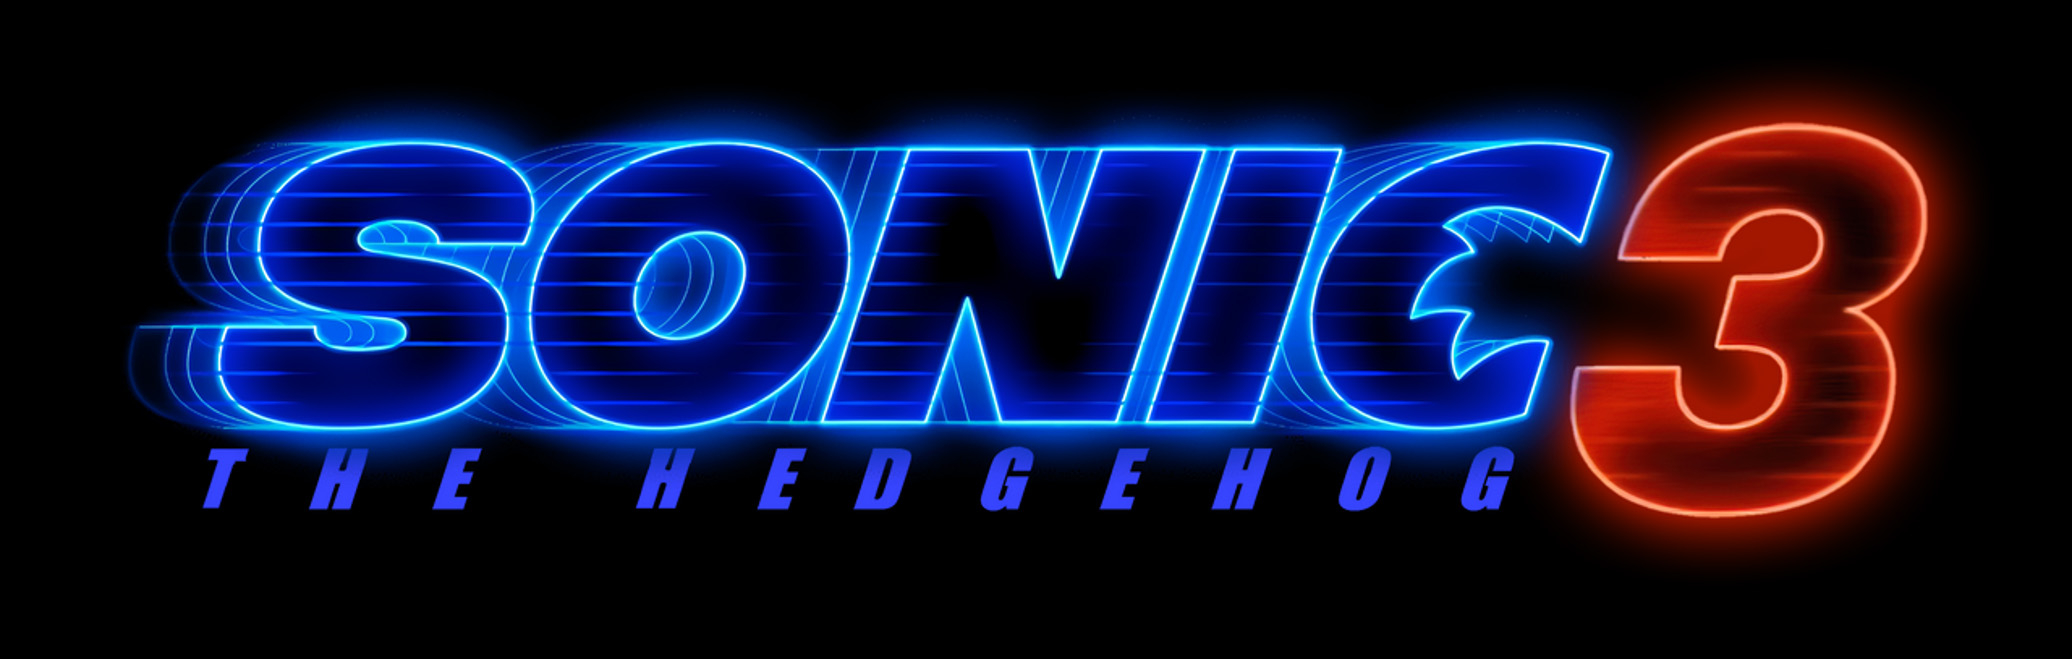 Does anyone know when sonic 3 will start production? : r/SonicTheMovie